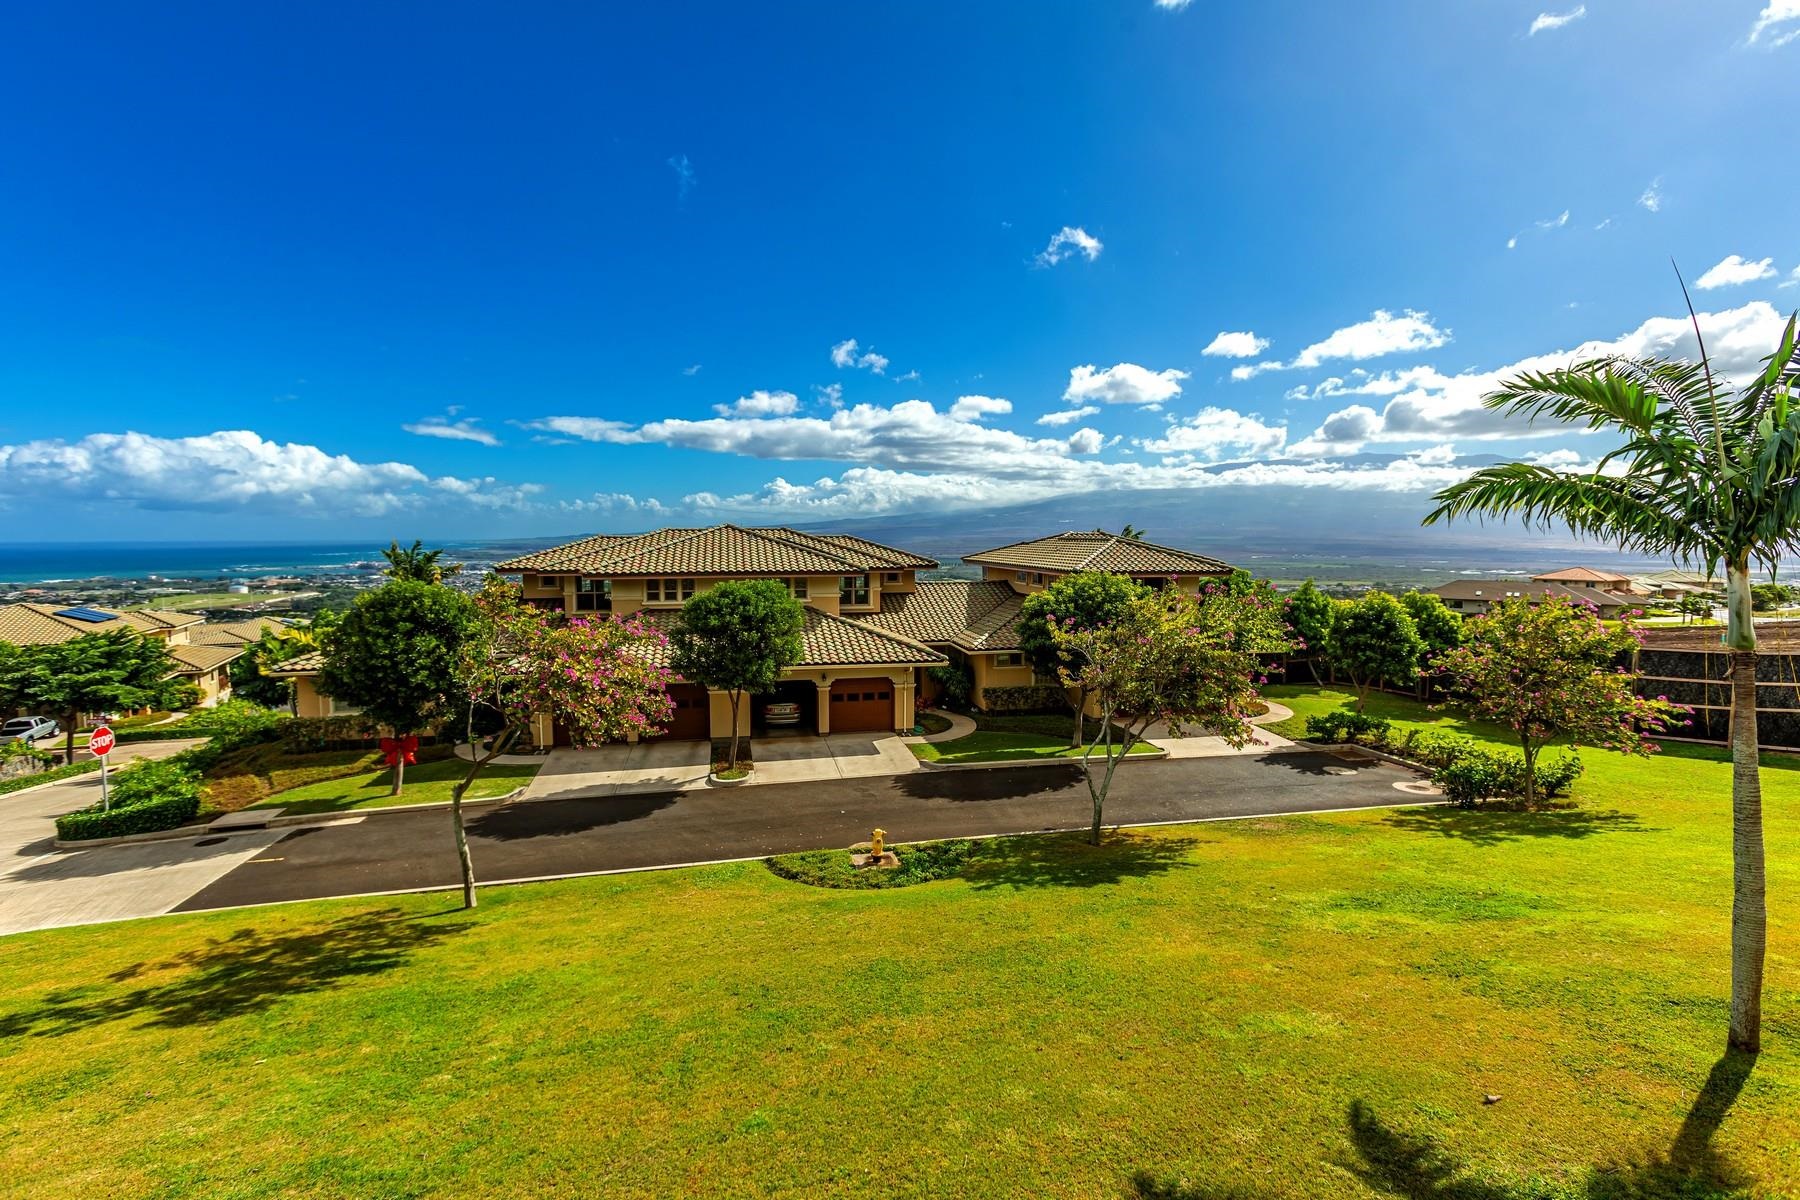 Welcome to the Villas, an upscale gated community in Central Maui ..